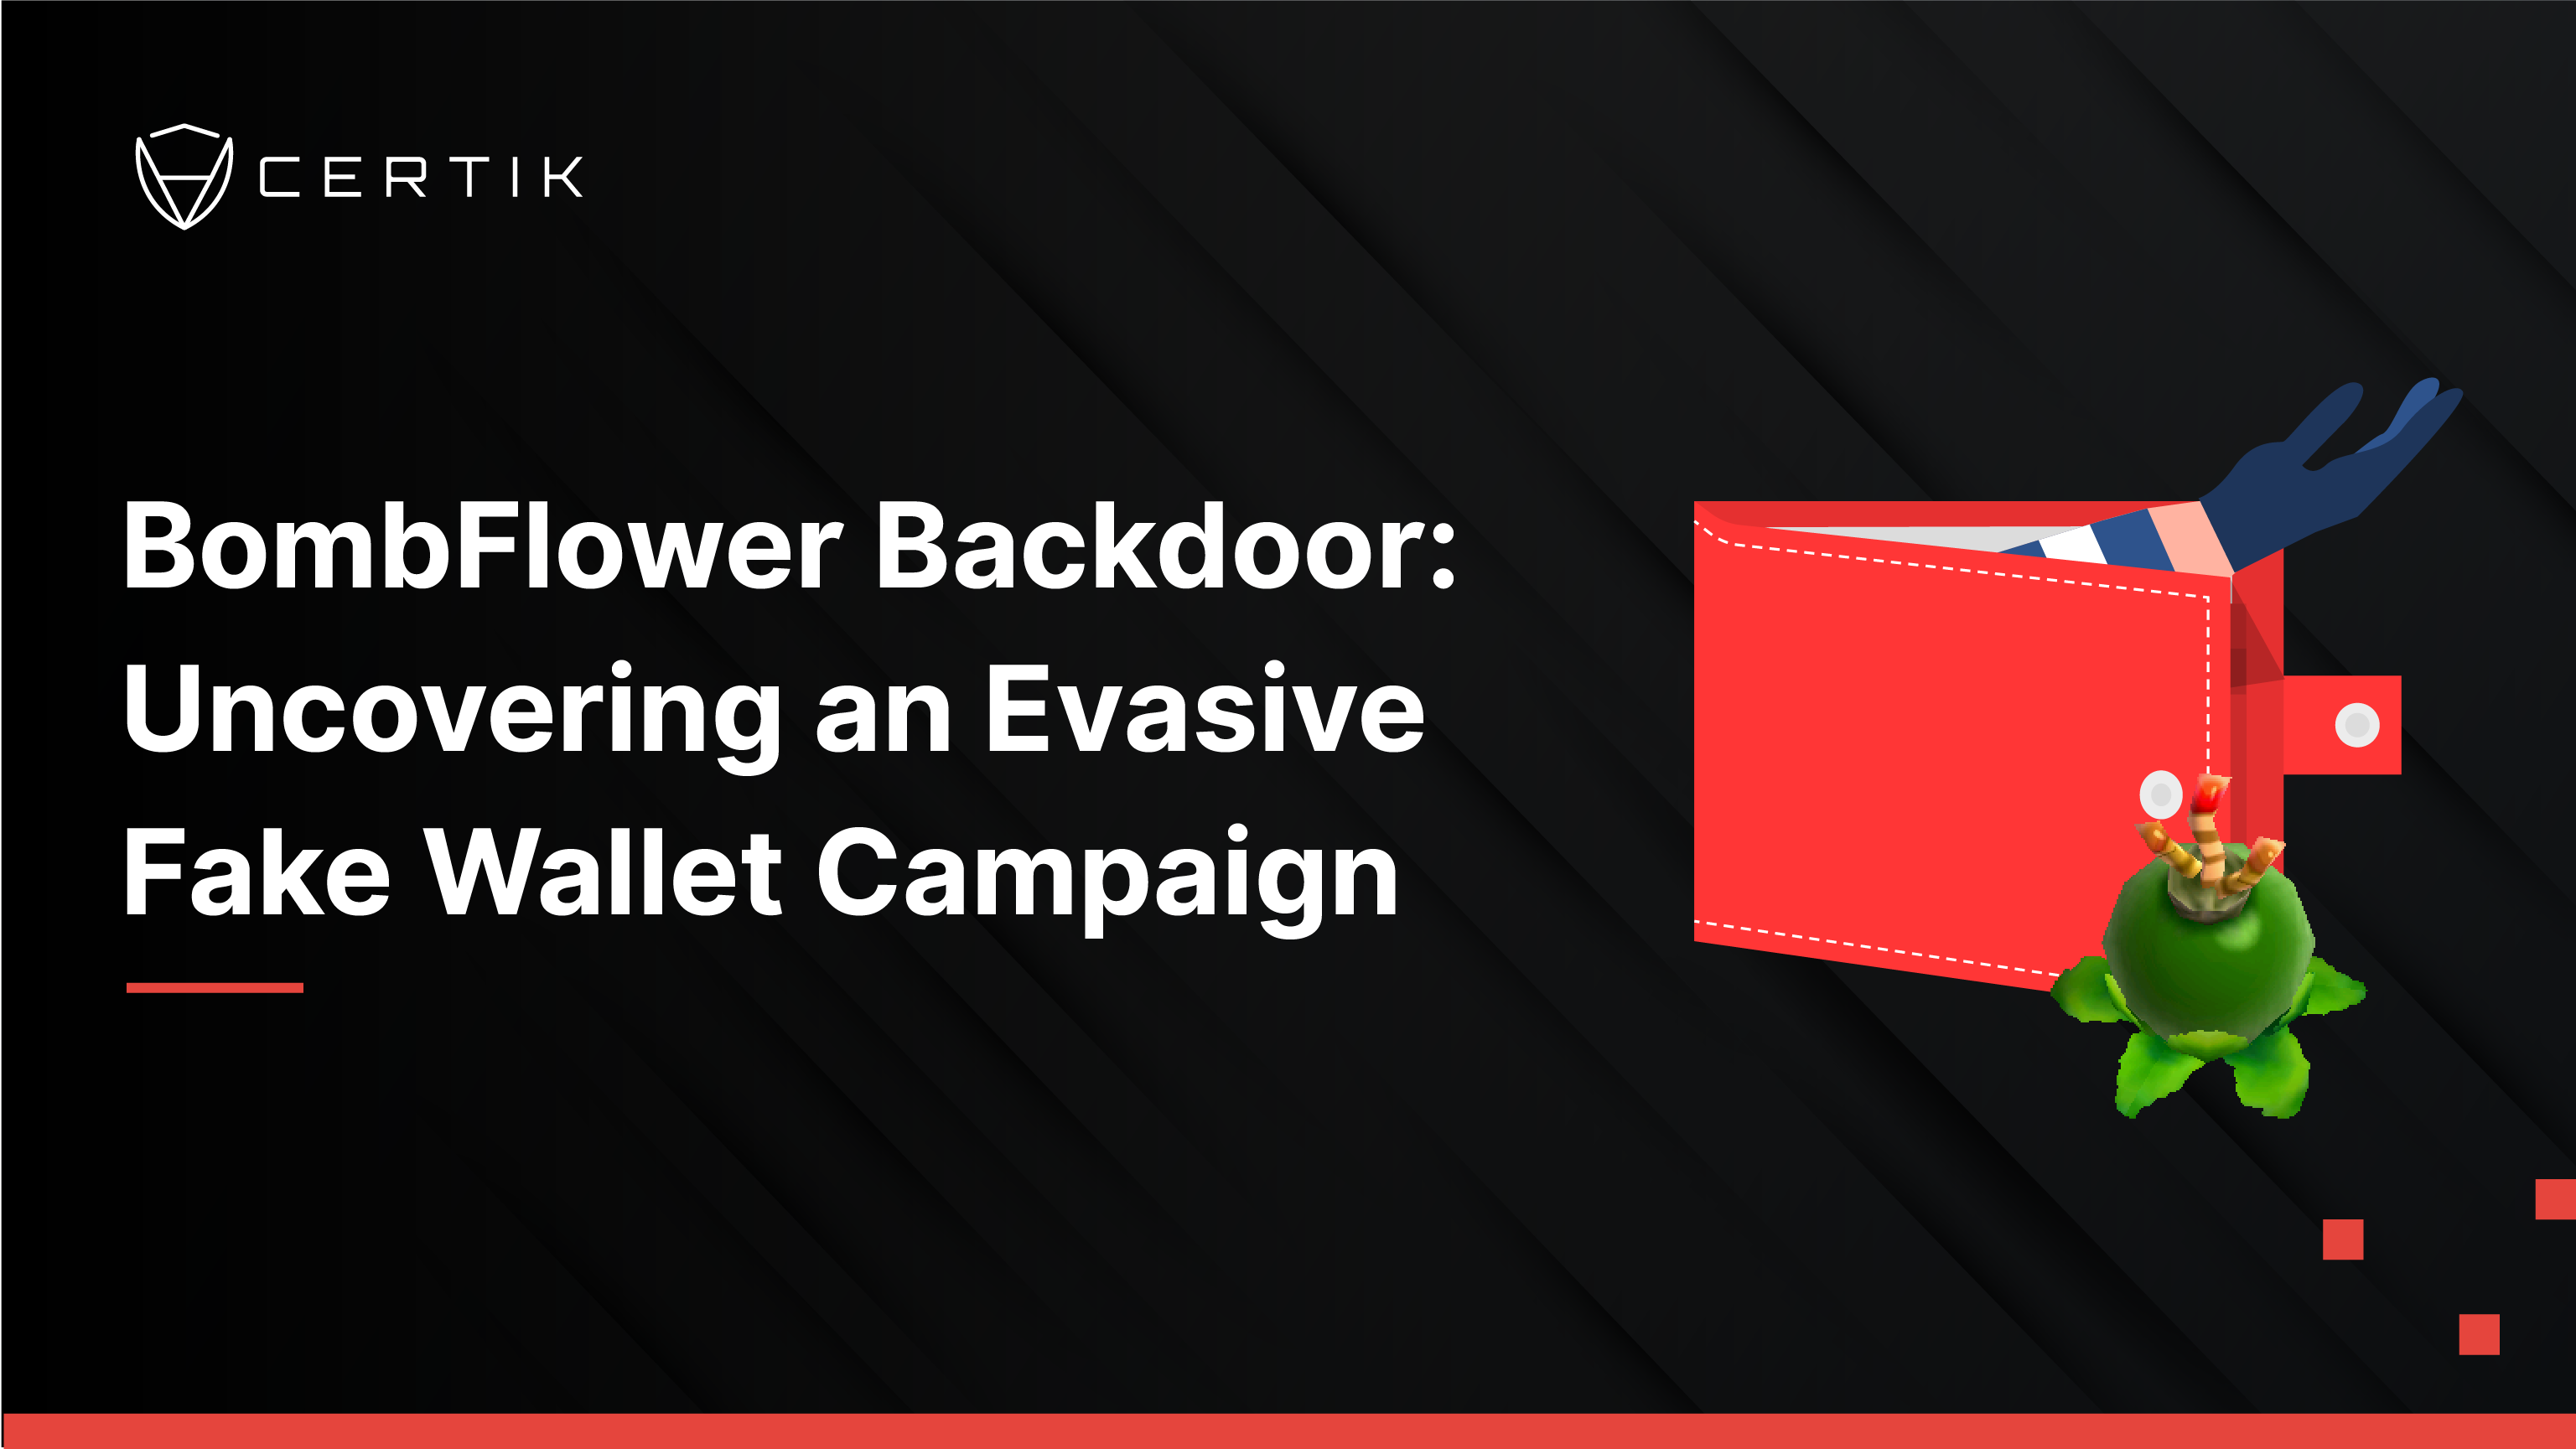 BombFlower Backdoor: Uncovering an Evasive Fake Wallet Campaign